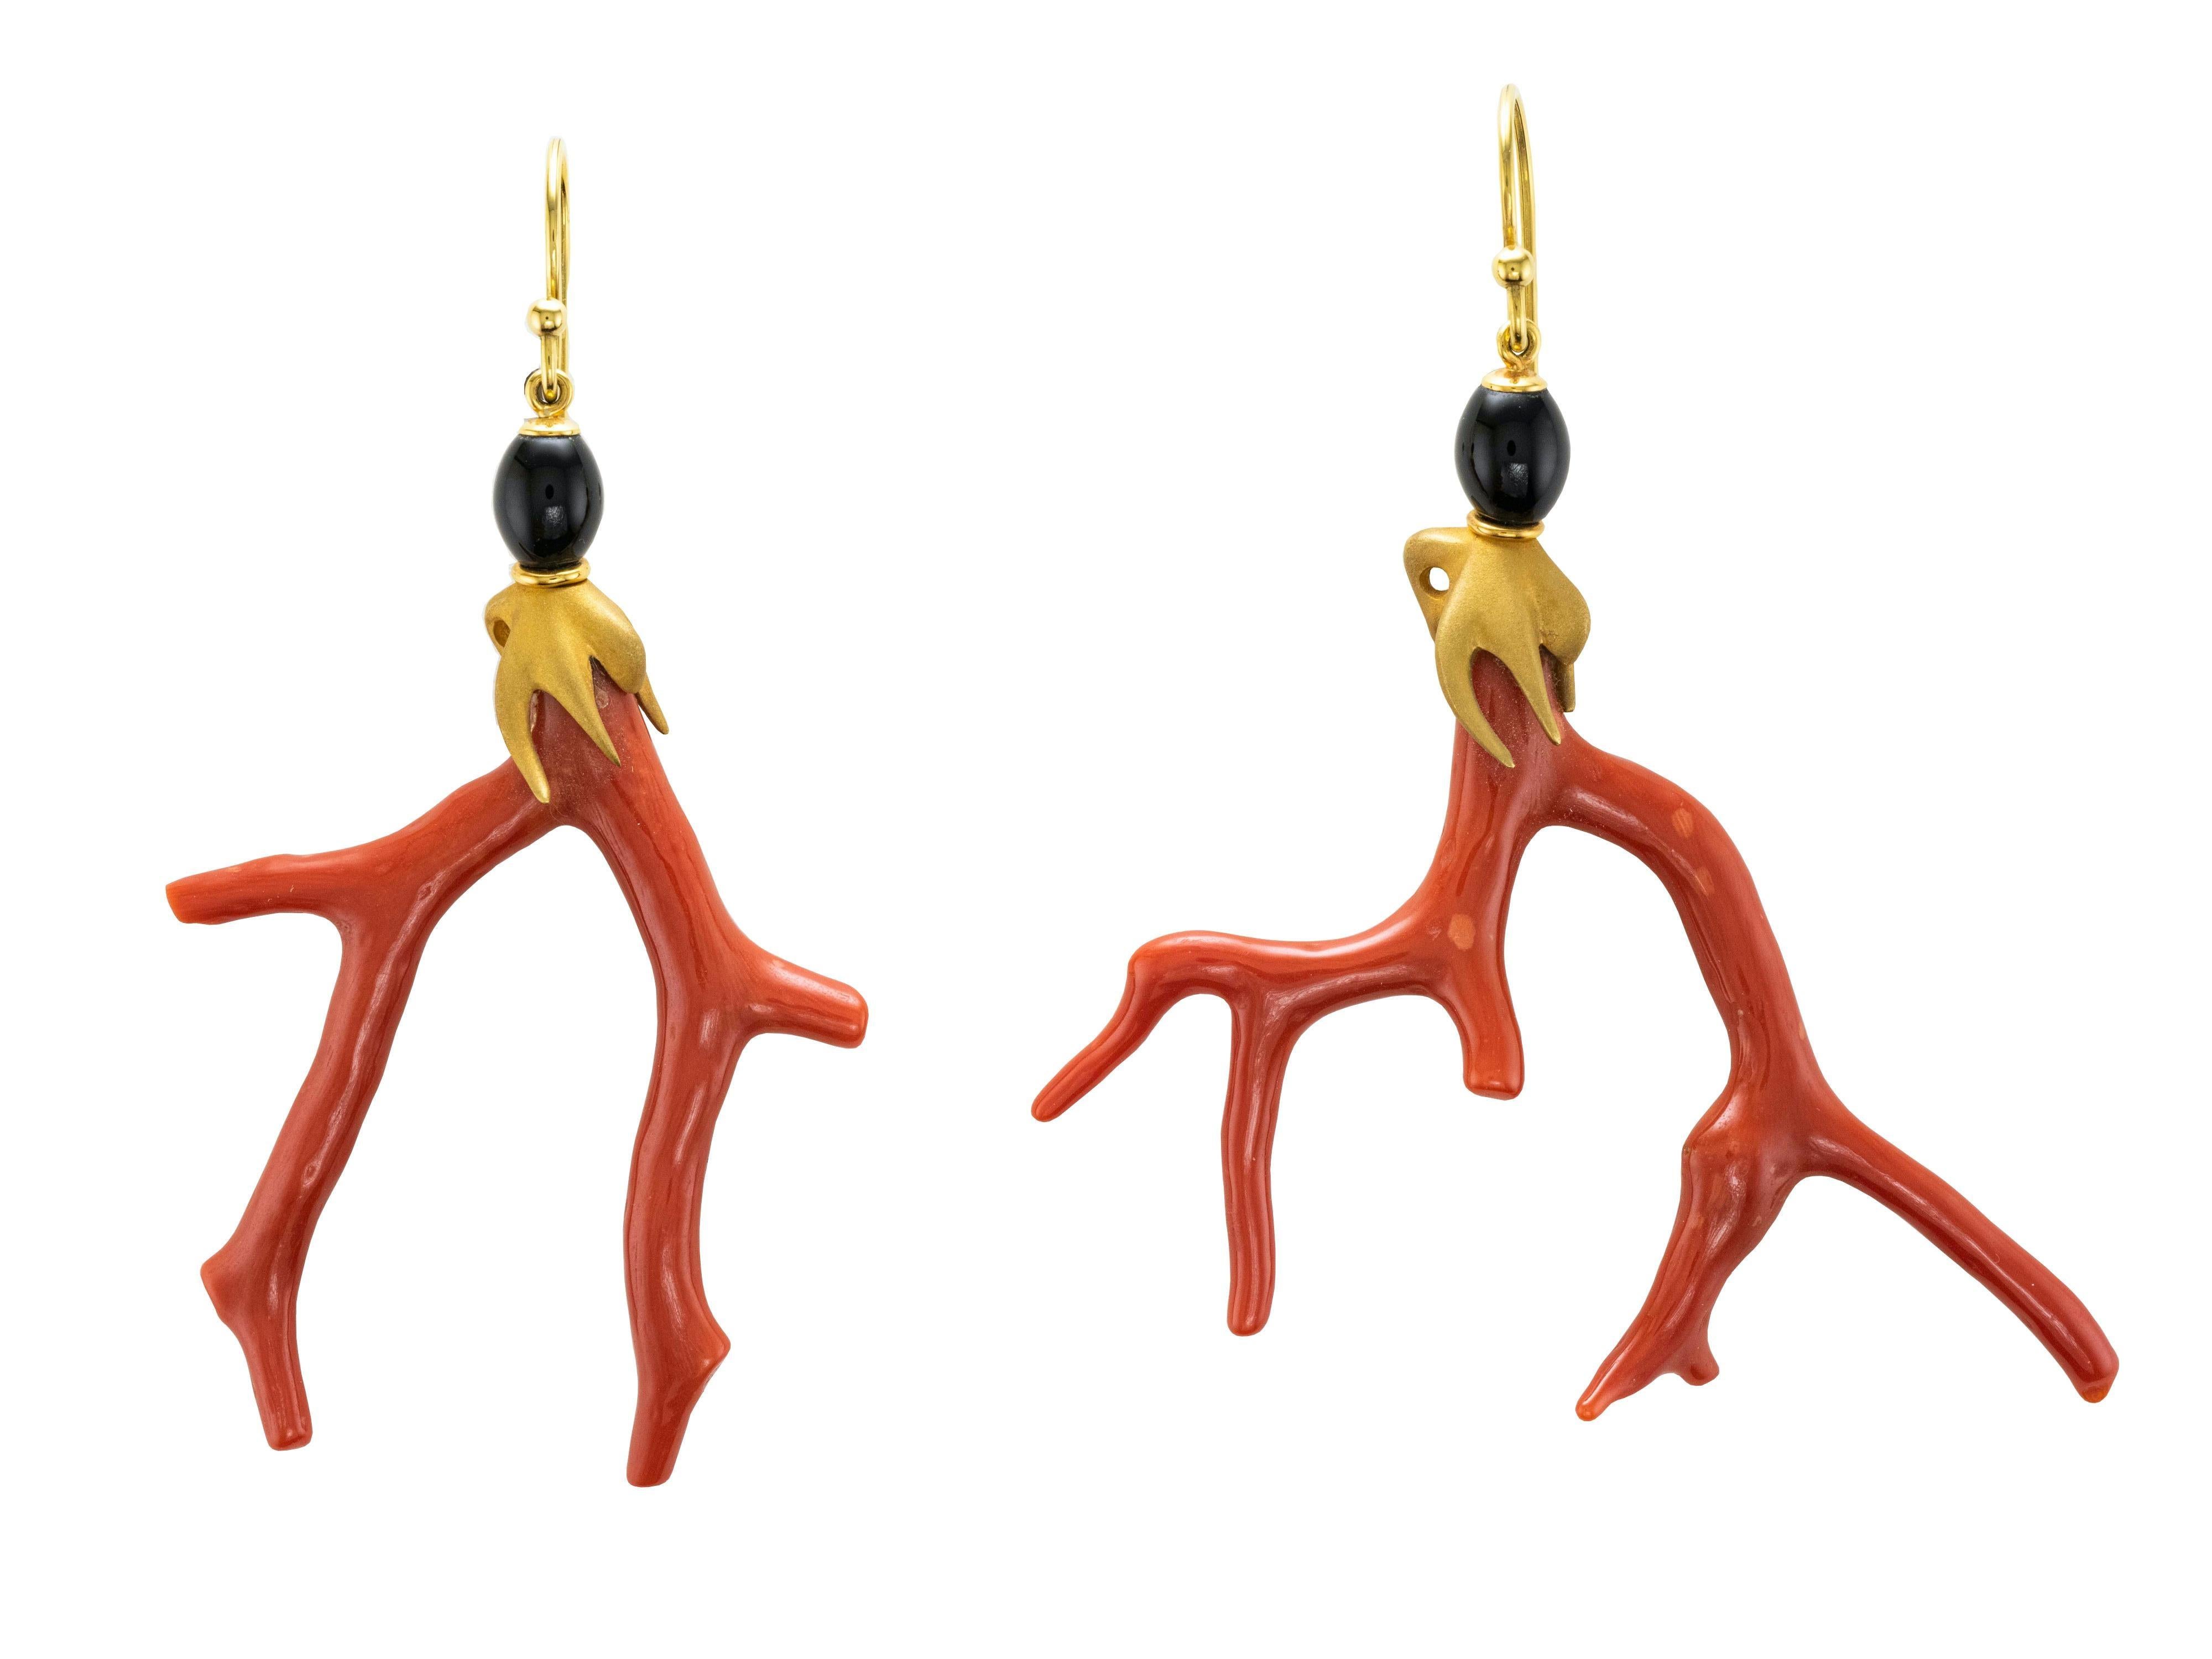 Earrings and pendant set in natural Mediterranean Coral and Onyx spheres. 
Hook and octopus holding the branch are in 18 Karat yellow gold.
Made in Italy.
Pendant measures: cm 10.00 x cm 8.50 circa
Gold weight gr 4.90
Earrings measures: Height cm 9